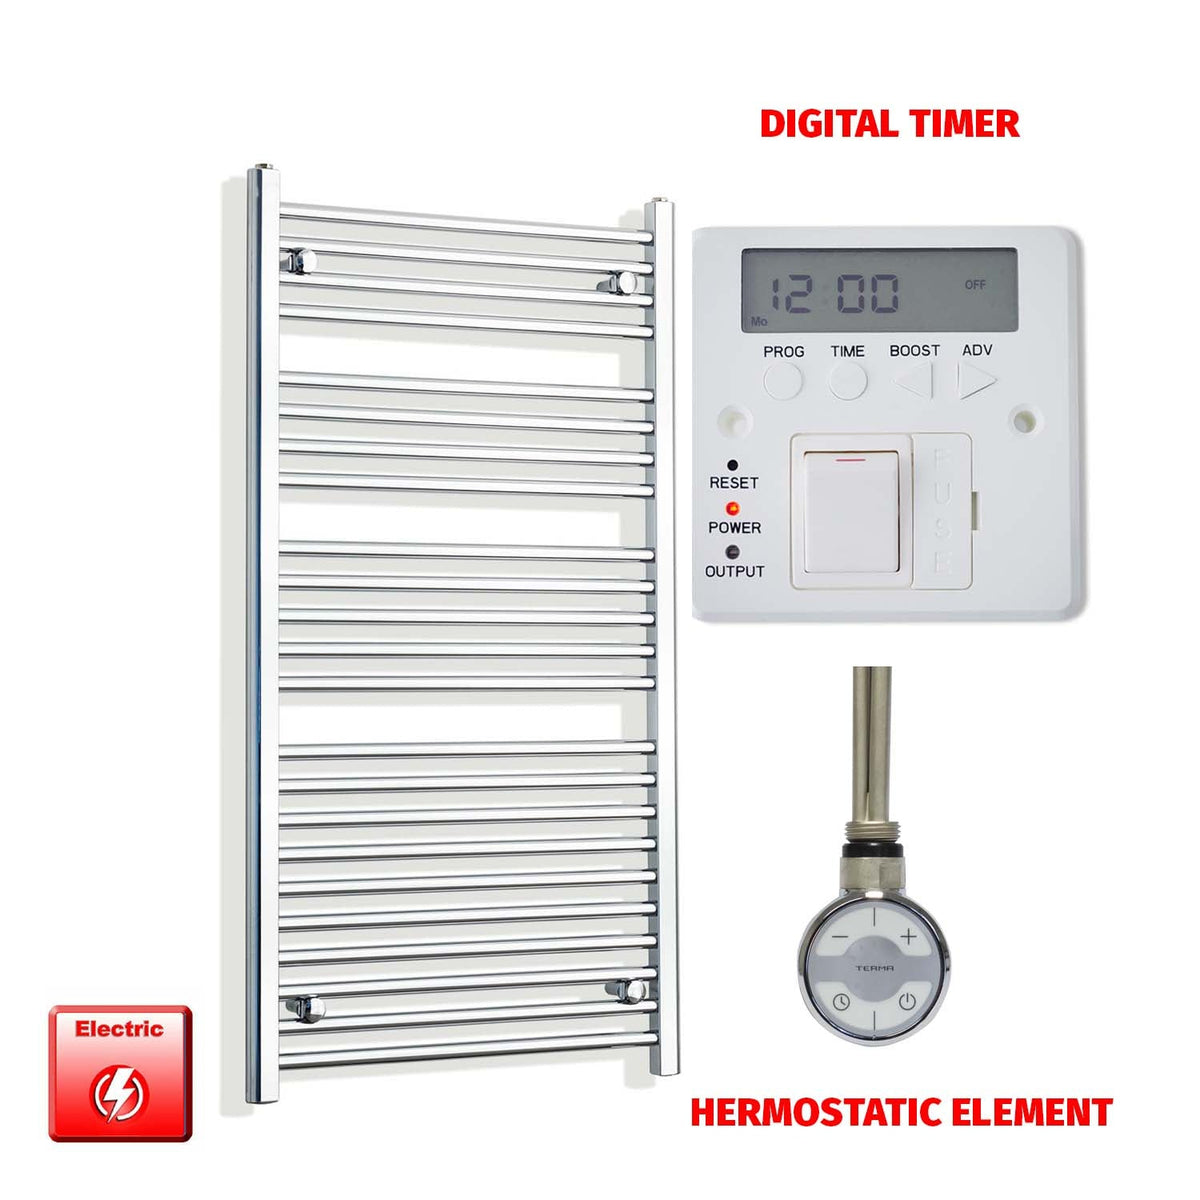 1200mm High 550mm Wide Pre-Filled Electric Heated Towel Radiator Chrome HTR MOA Thermostatic element Digital timer